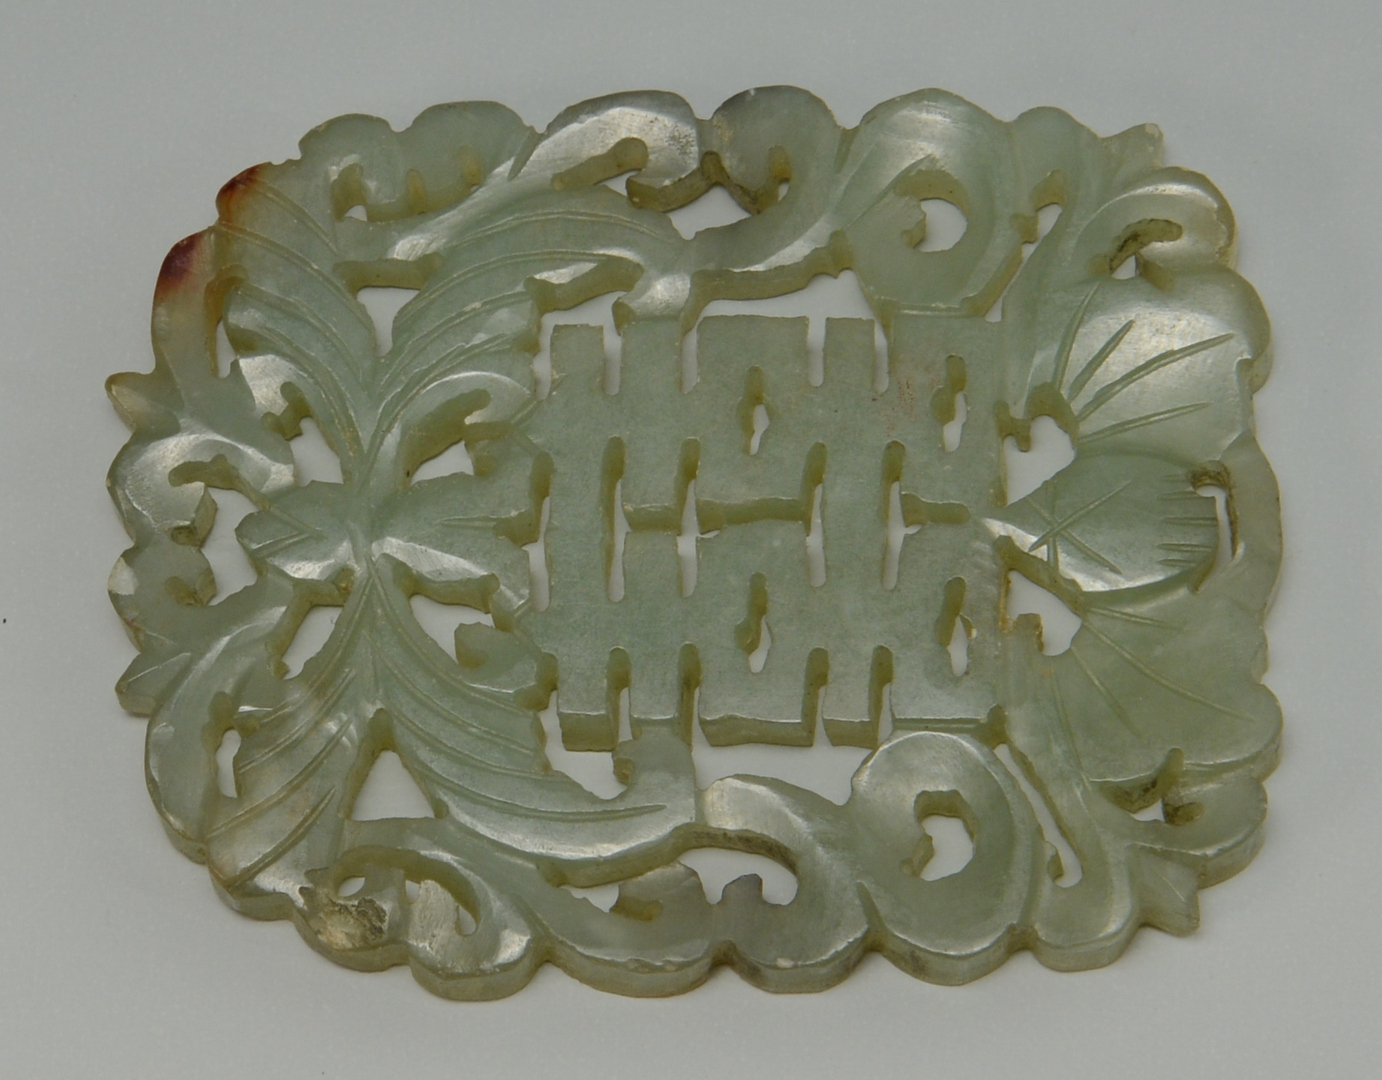 Lot 3088145: 2 Carved Chinese Jade Plaques